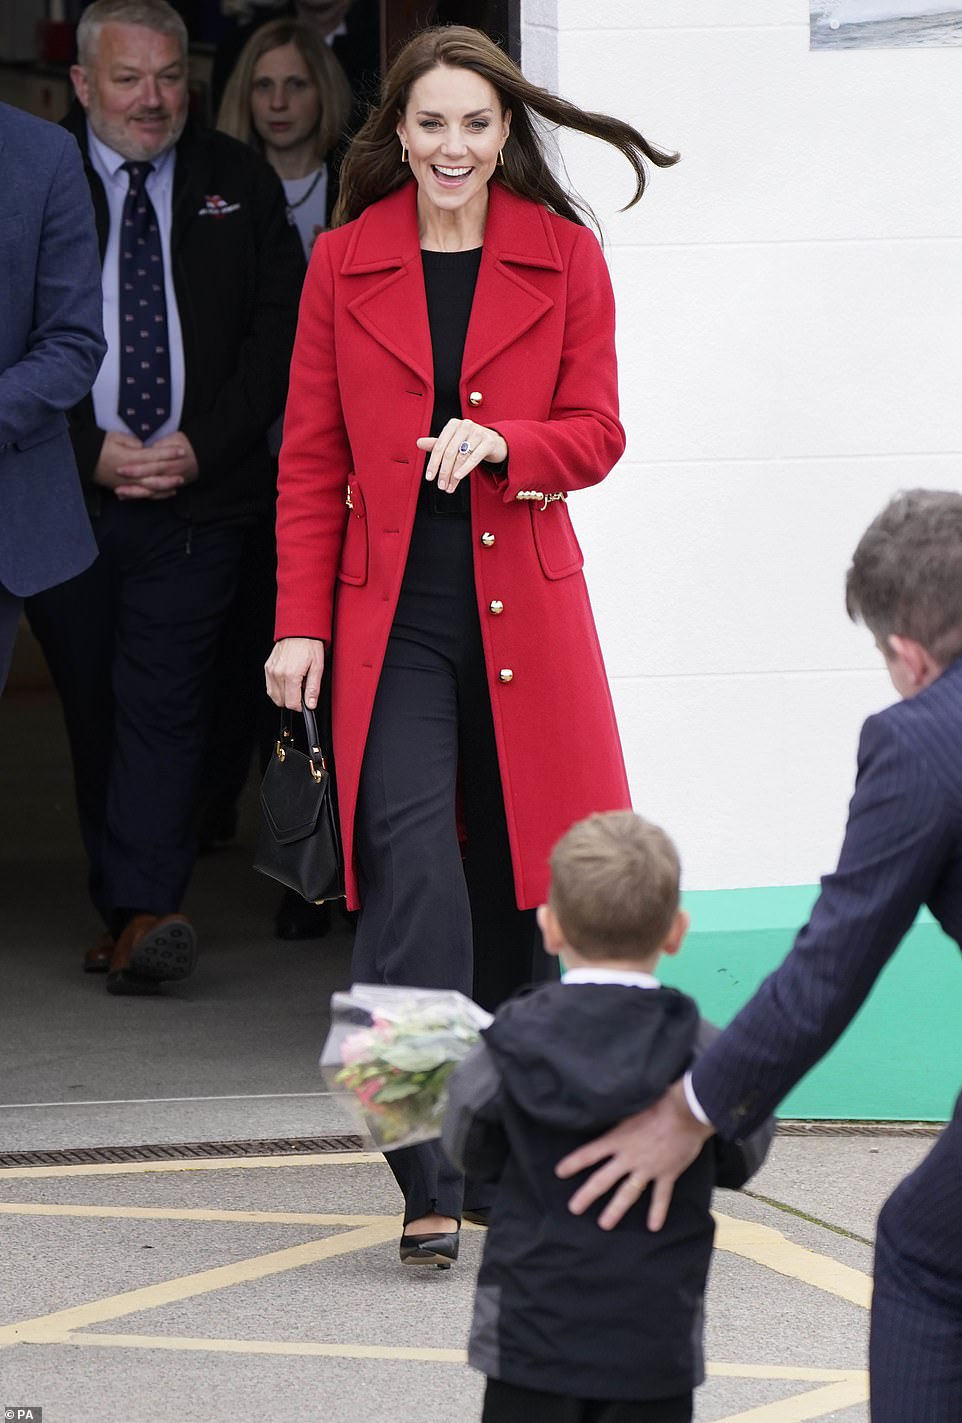 The Princess of Wales receives a posy of flowers during a visit to the RNLI Holyhead Lifeboat Station, in Holyhead, Wales